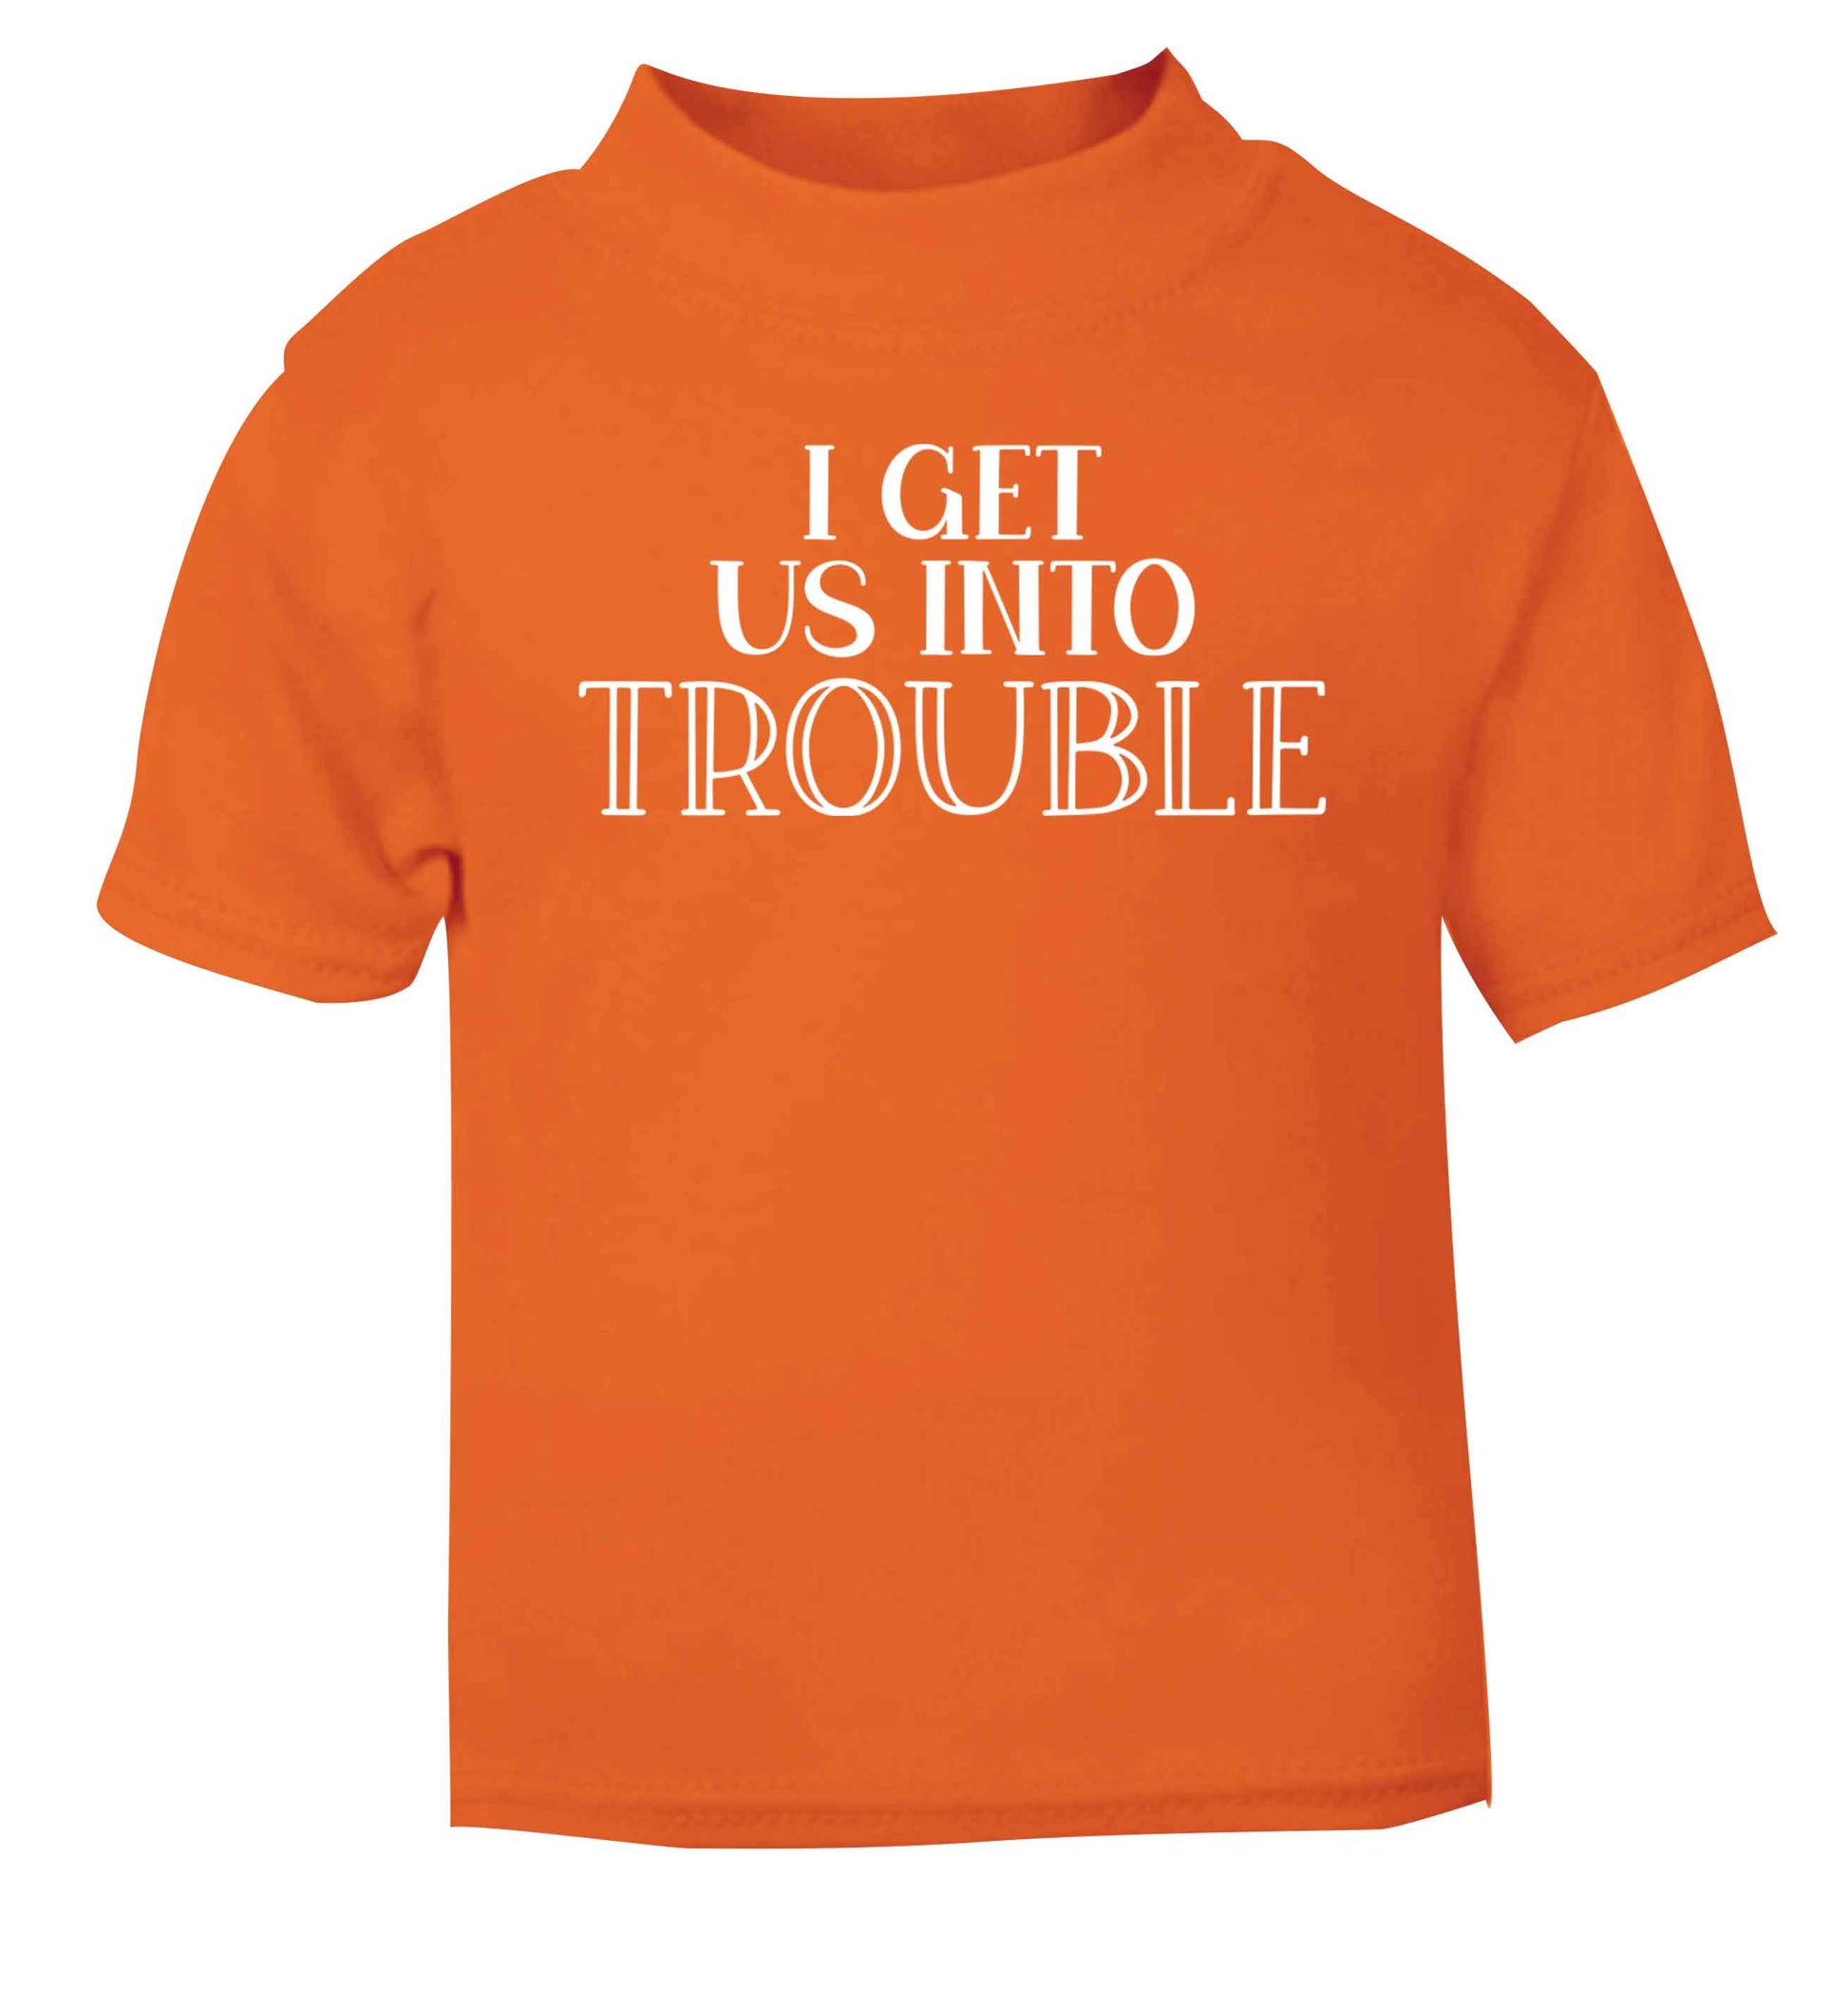 I get us into trouble orange baby toddler Tshirt 2 Years